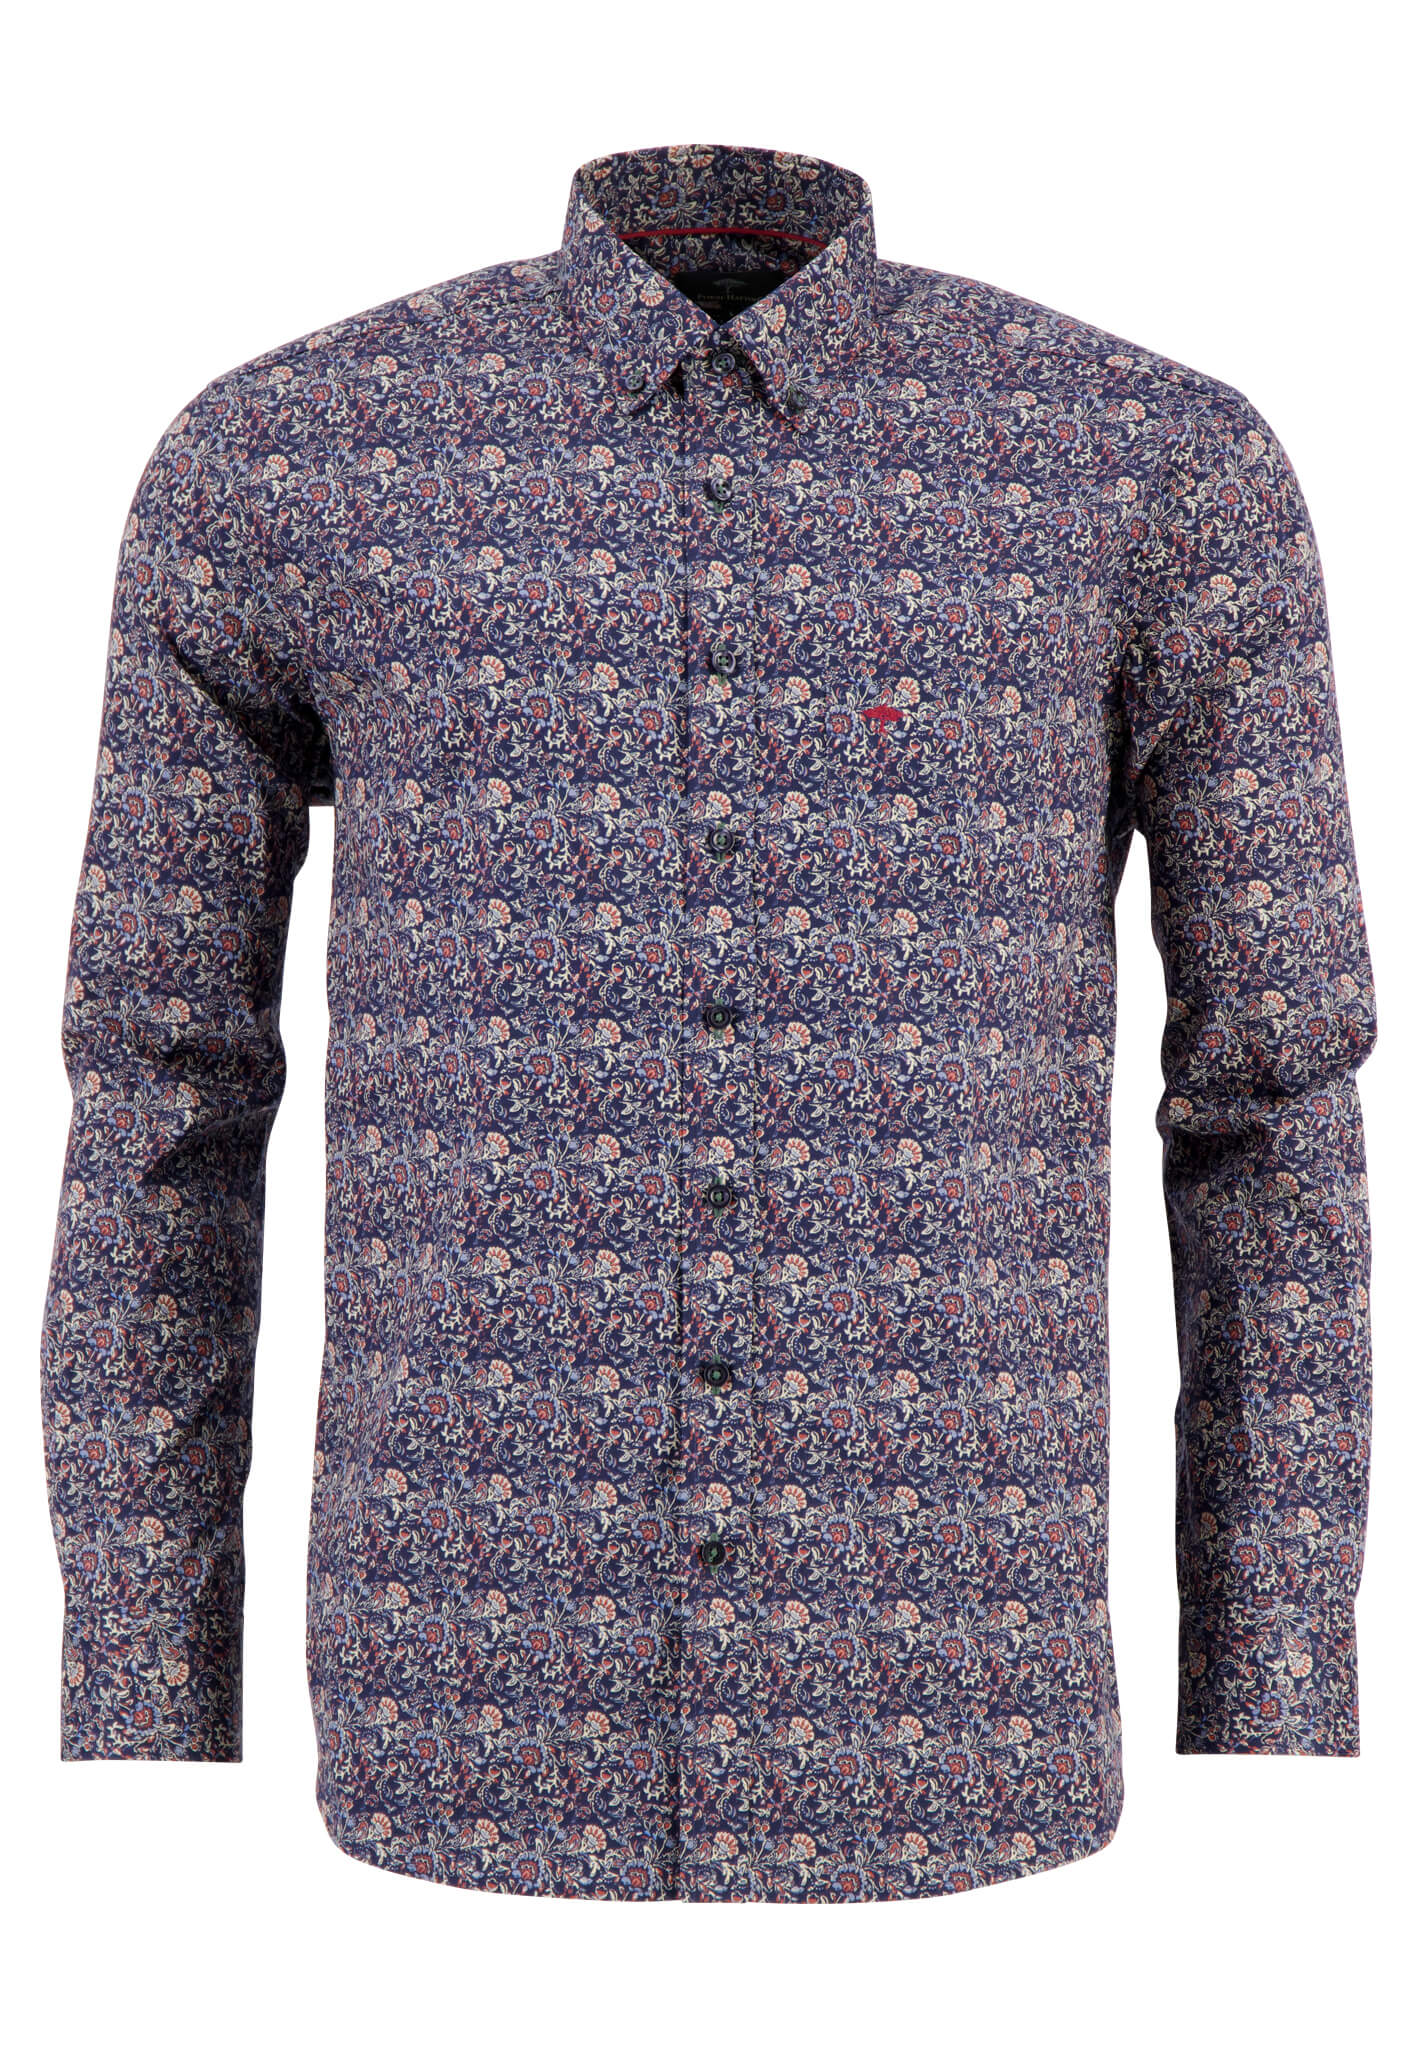 Fynch Hatton paisley floral shirt front